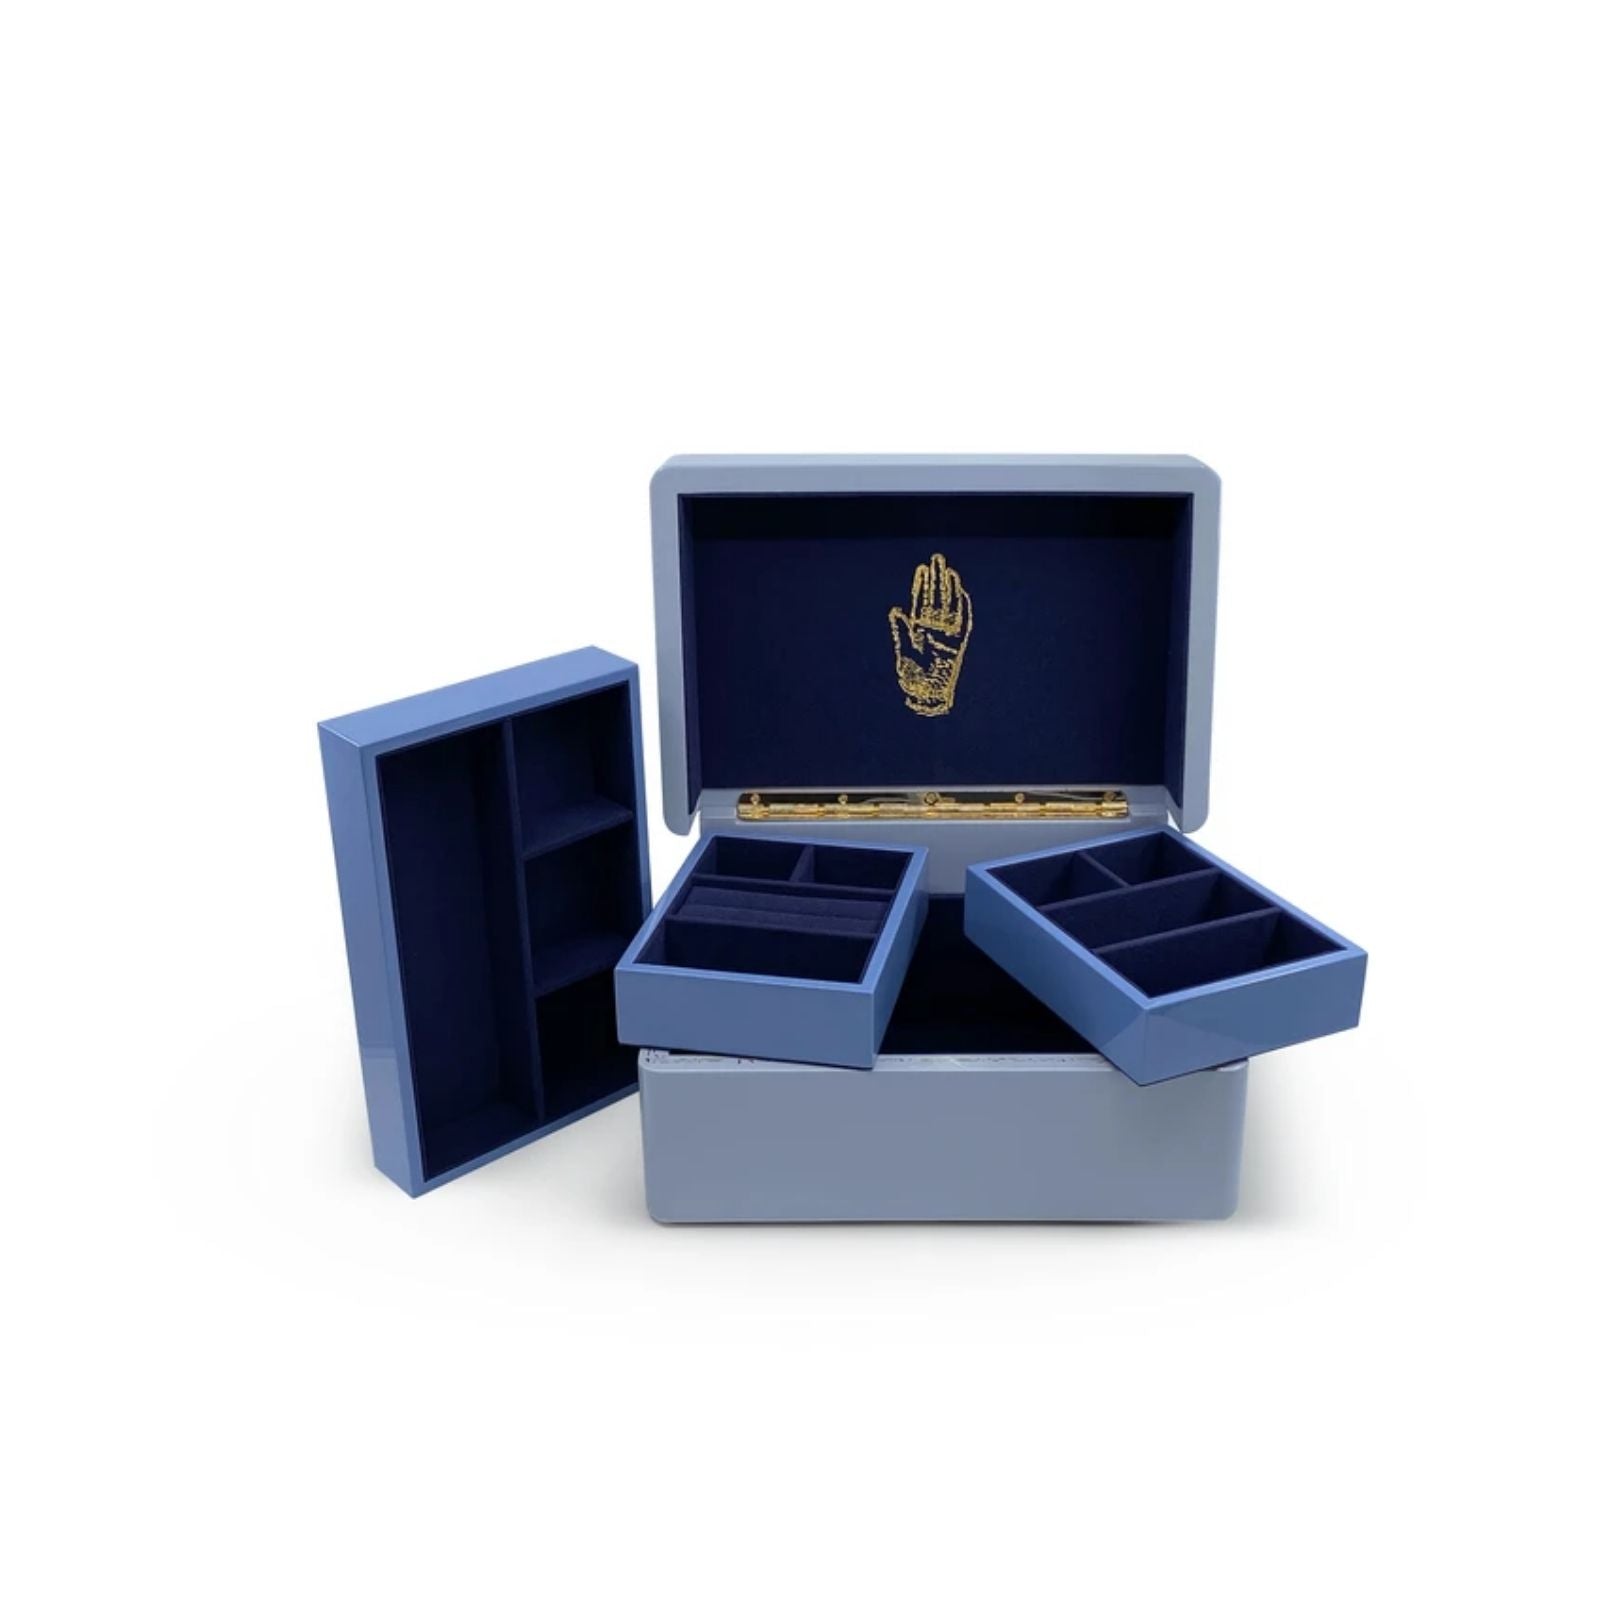 EVENING BLUE MINI TRUNK, Color: Dusty blue top and indigo interior Wood with high lacquer finish 3 levels of storage Features delicate gold effect inlay Brass plated hardware Faux suede interior 10" x 6.9" x 5.1" Due to the nature of lacquer, there may be